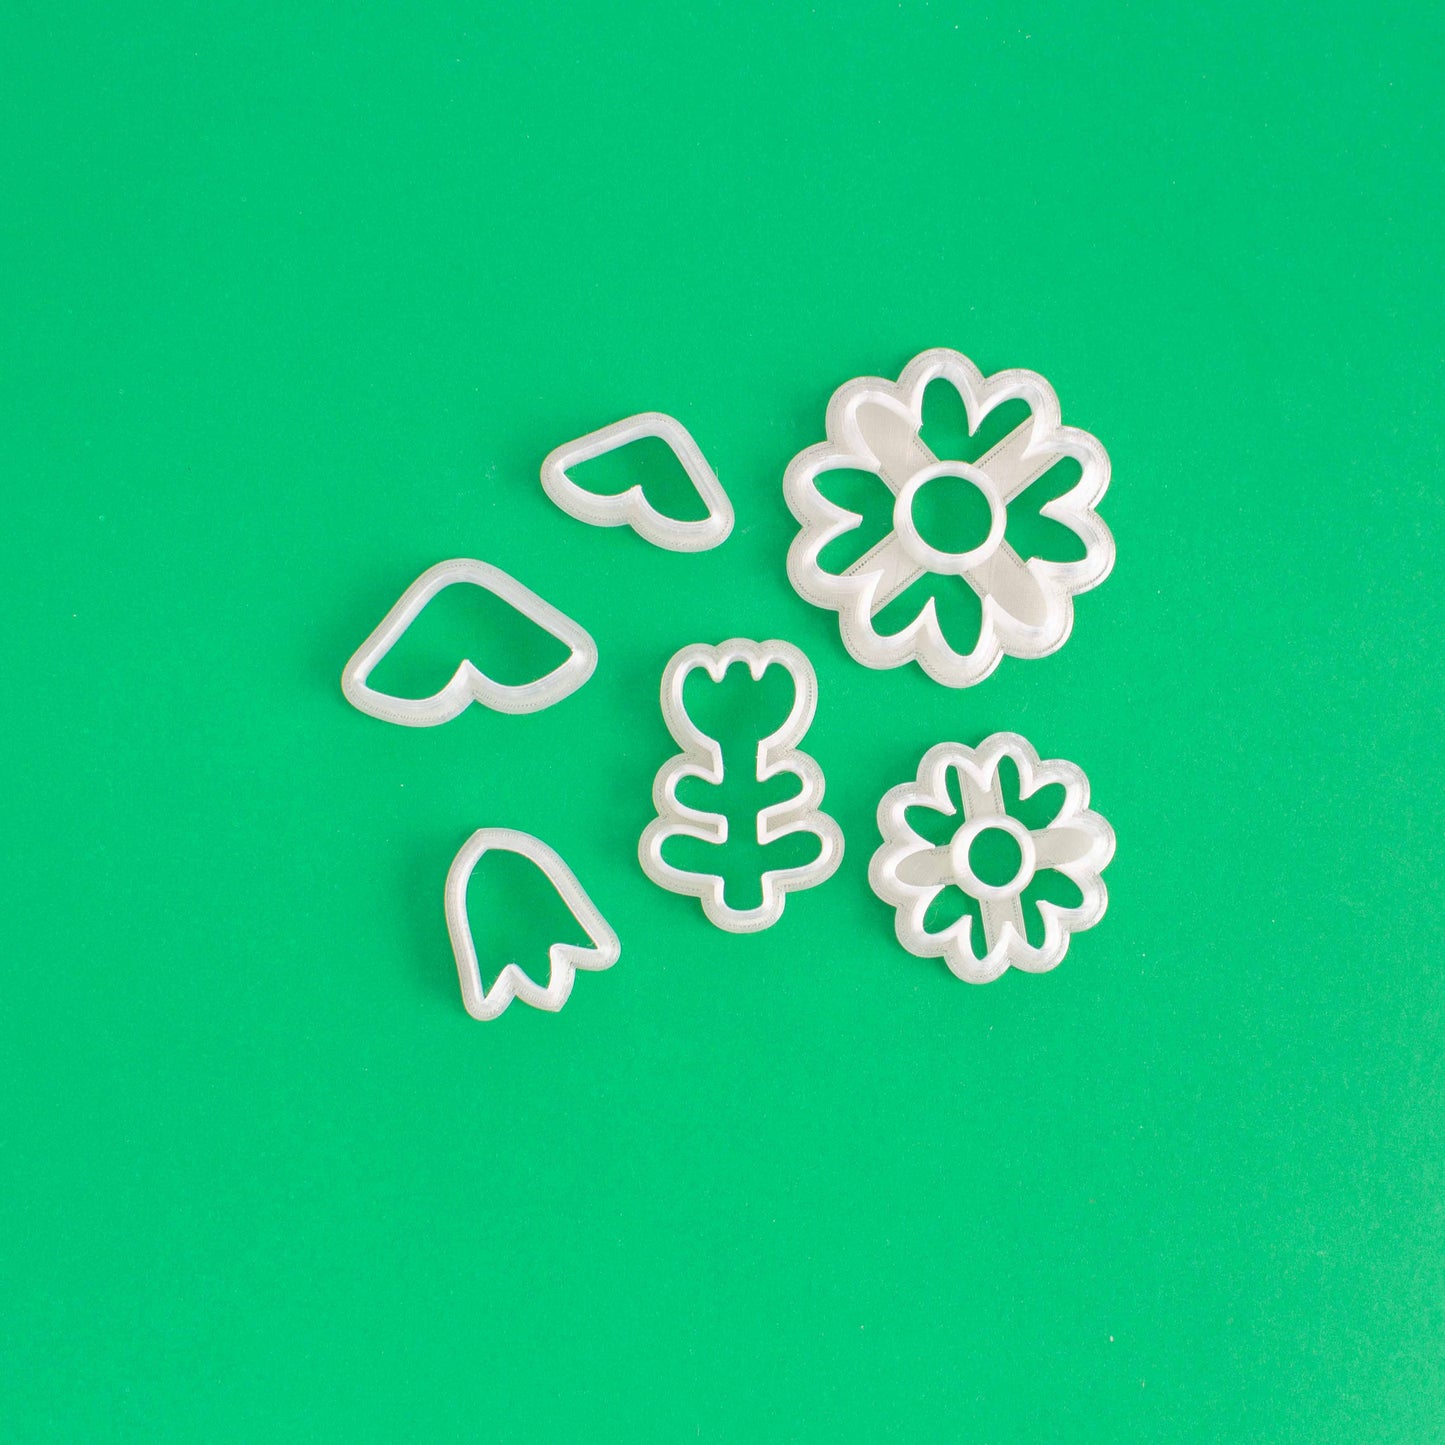 Flower shape clay cutters on a green background.